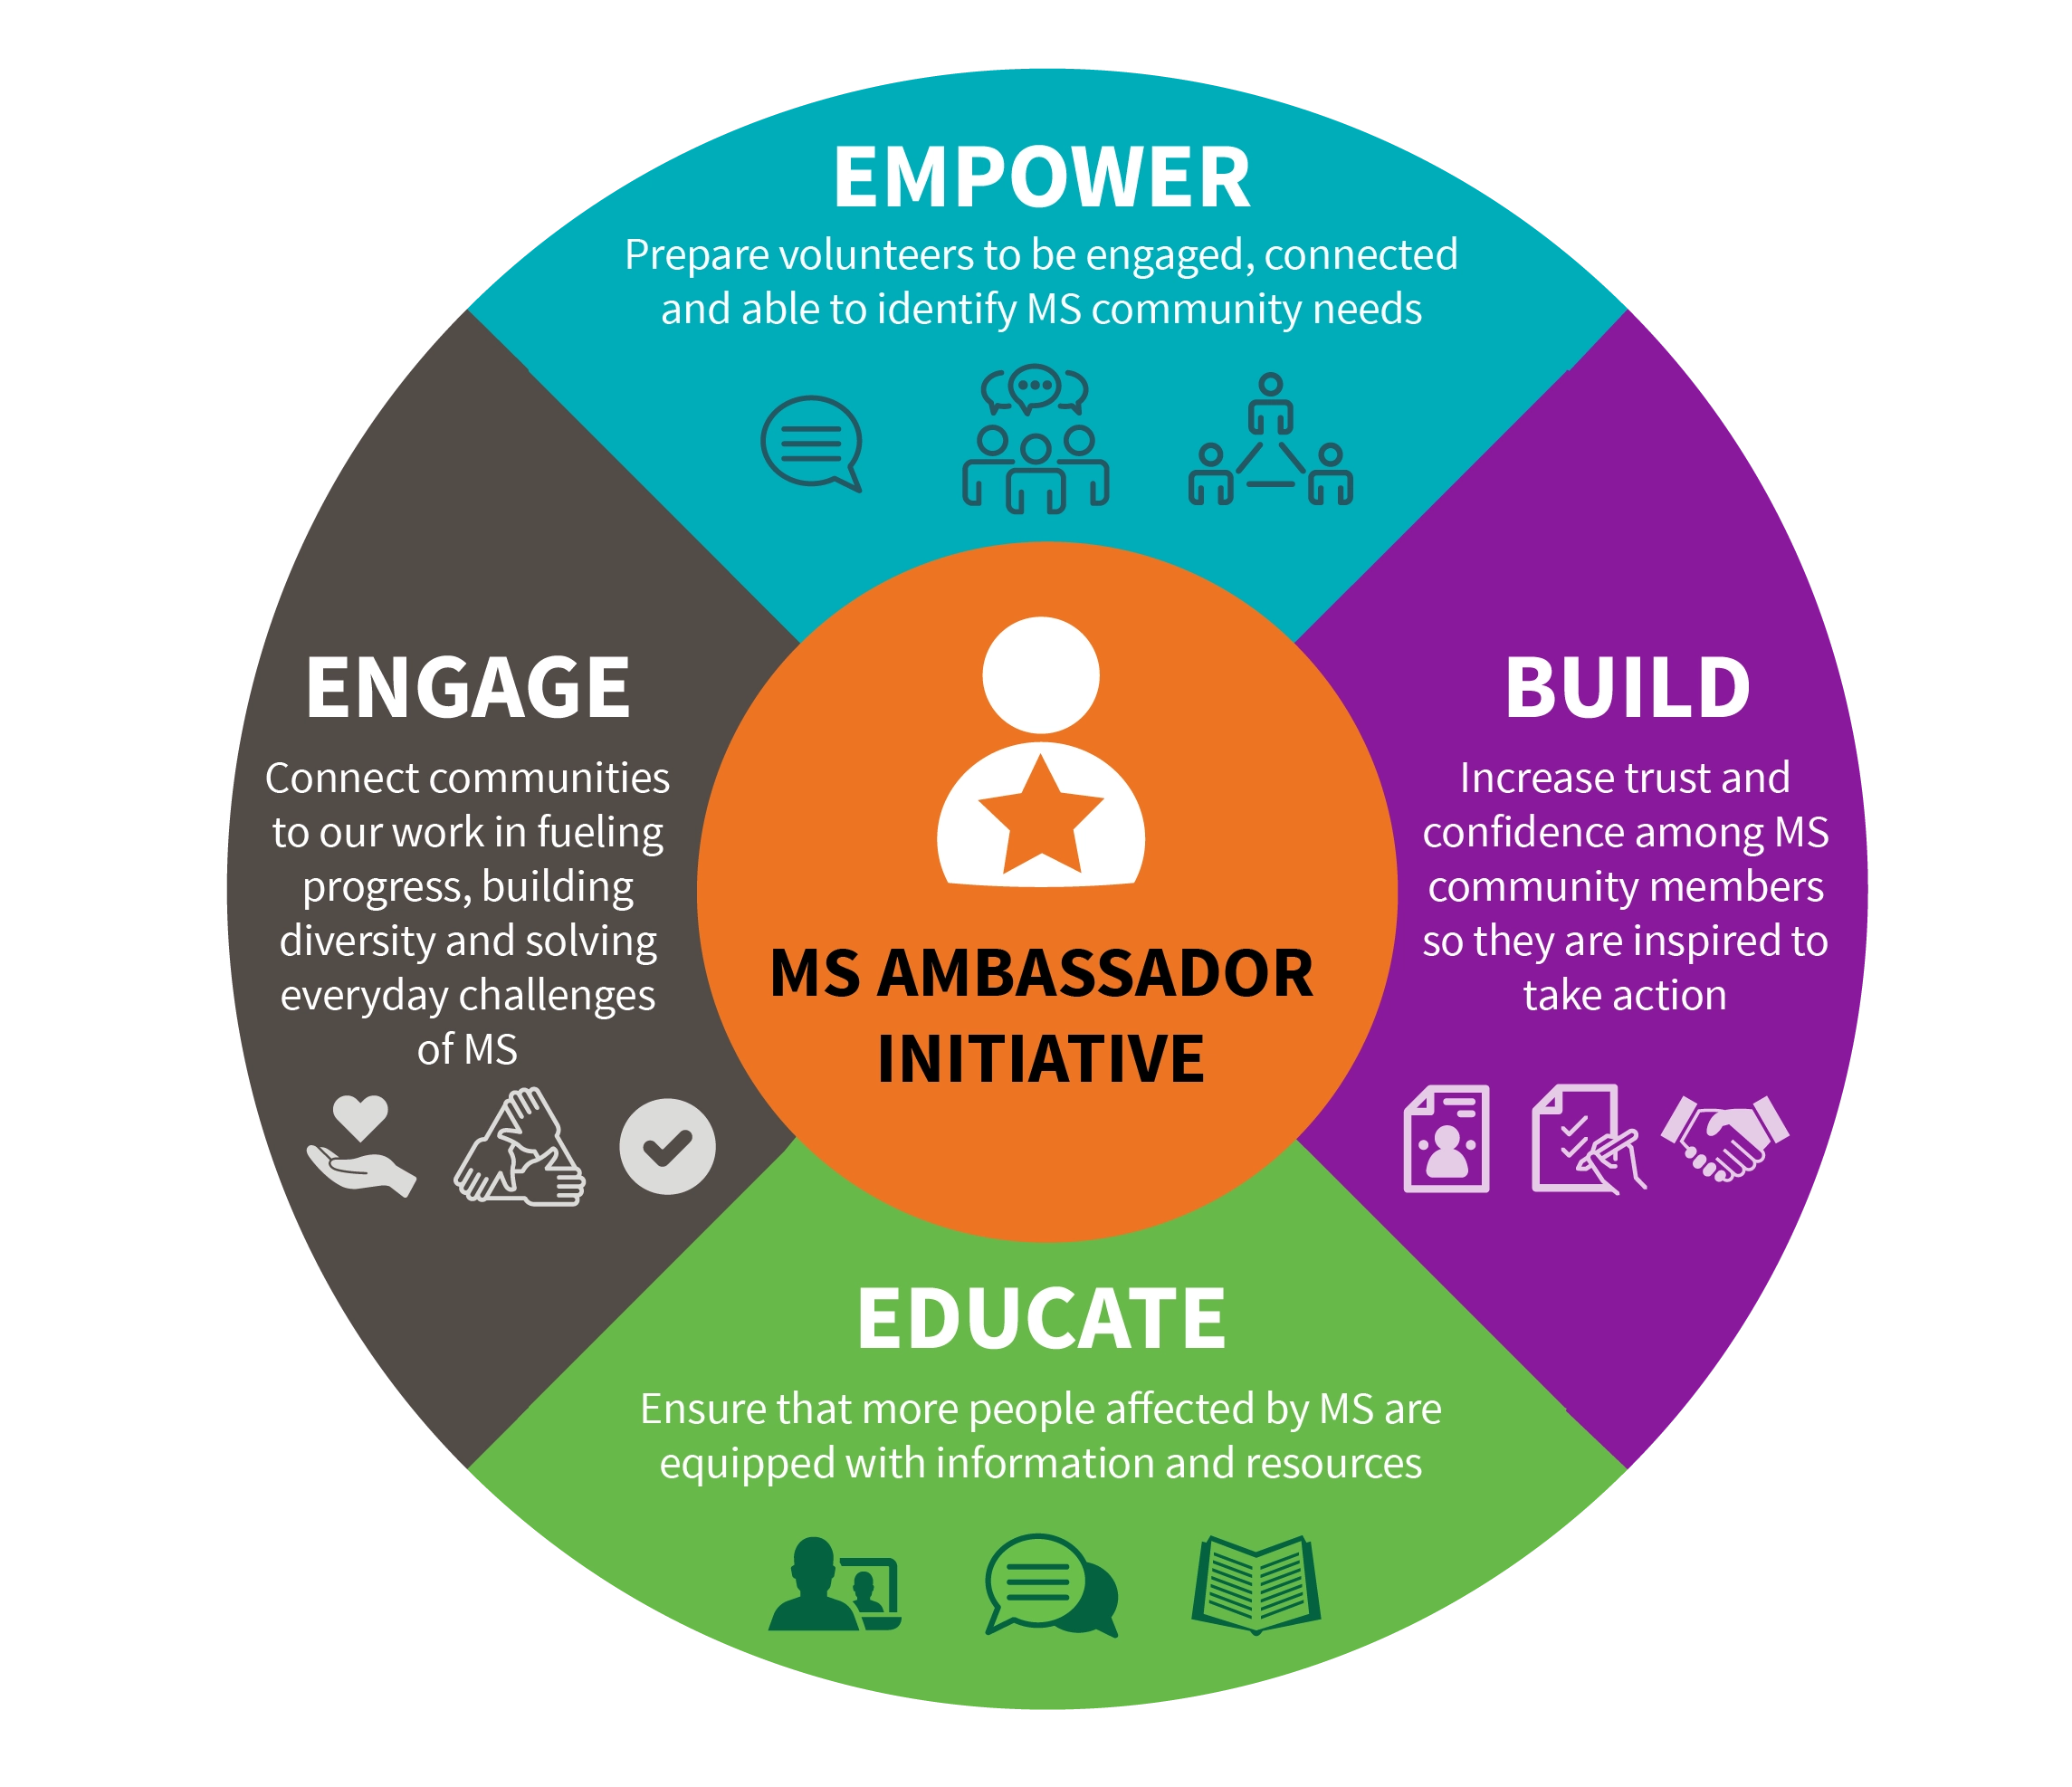 This is a circular infographic illustrating the four parts of the MS Ambassador mission: Empower, engage, educate and build.